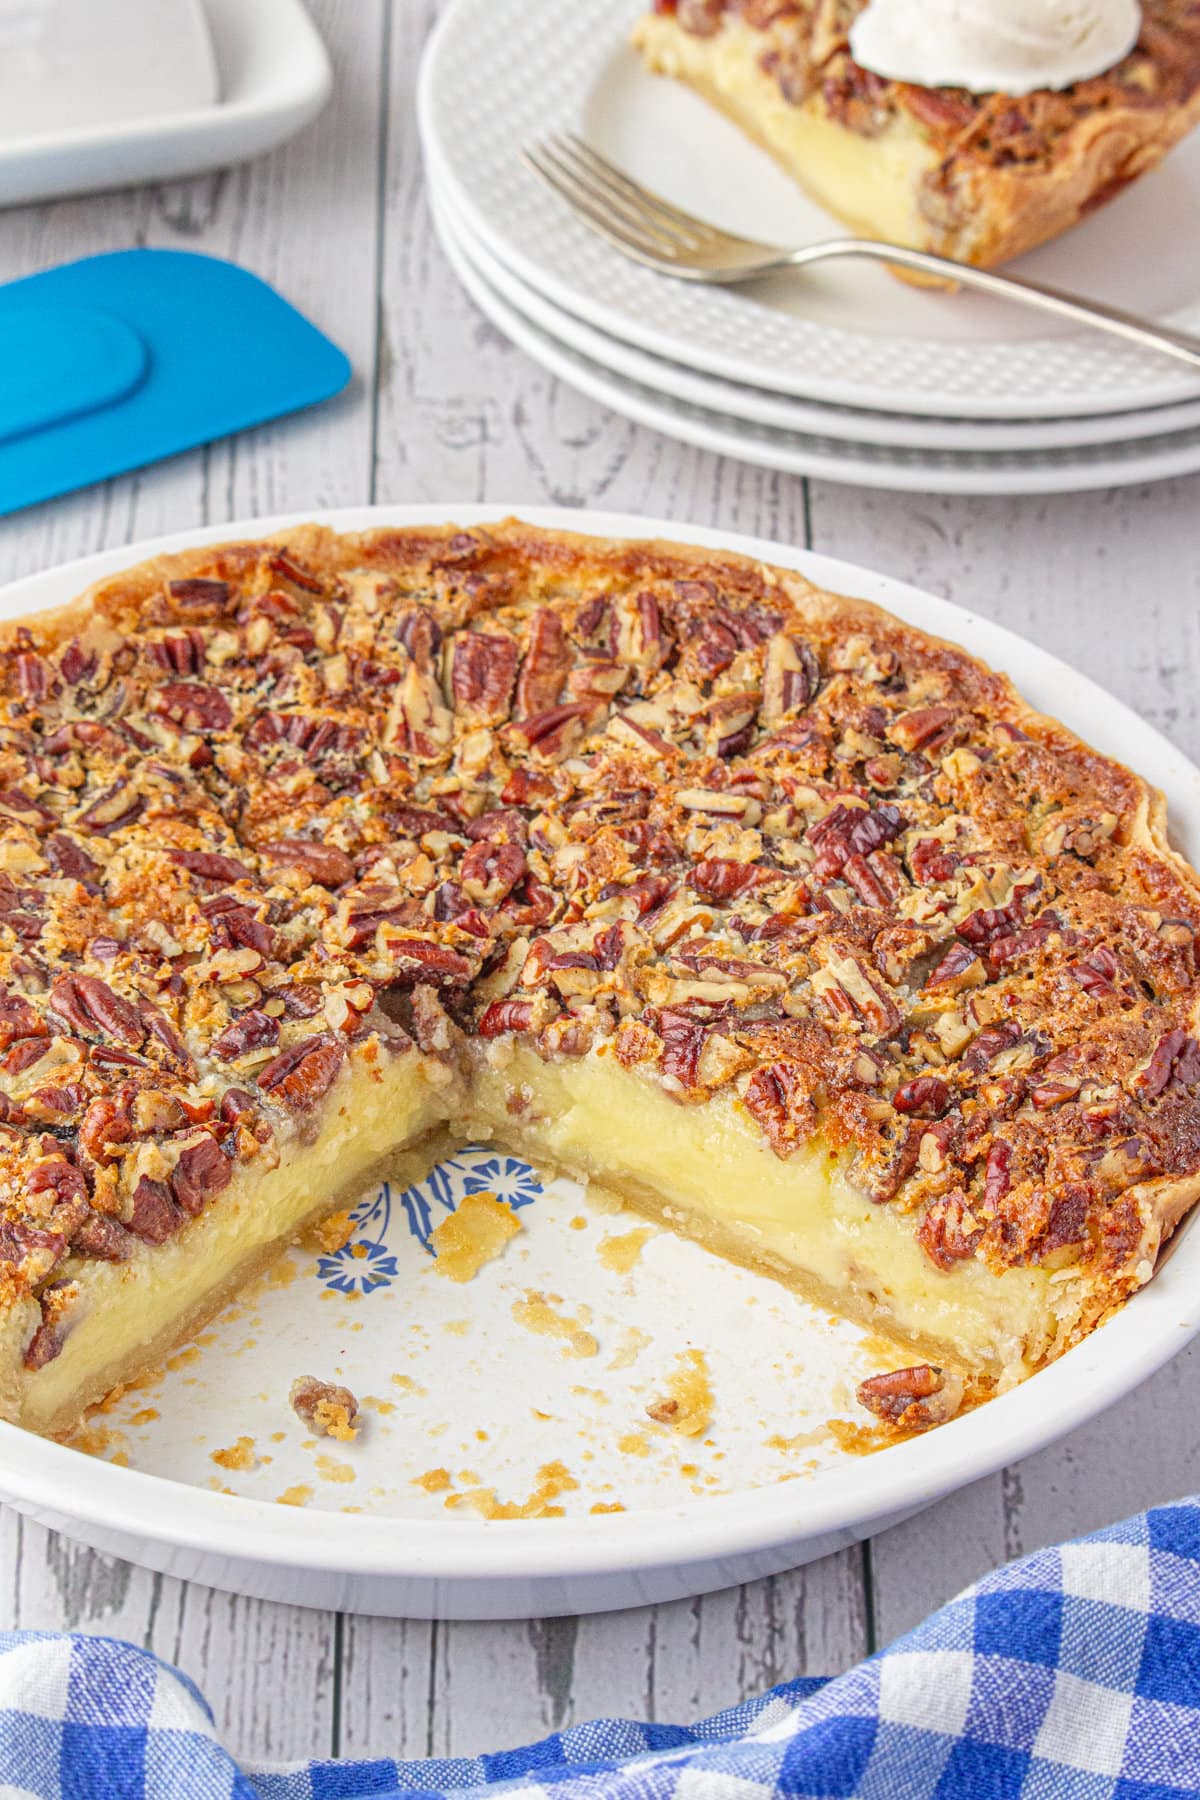 A buttermilk pecan pie with a large slice removed to a plate in the background. The interior of the pie shows pie crust topped with a buttermilk layer which is topped with pecans.